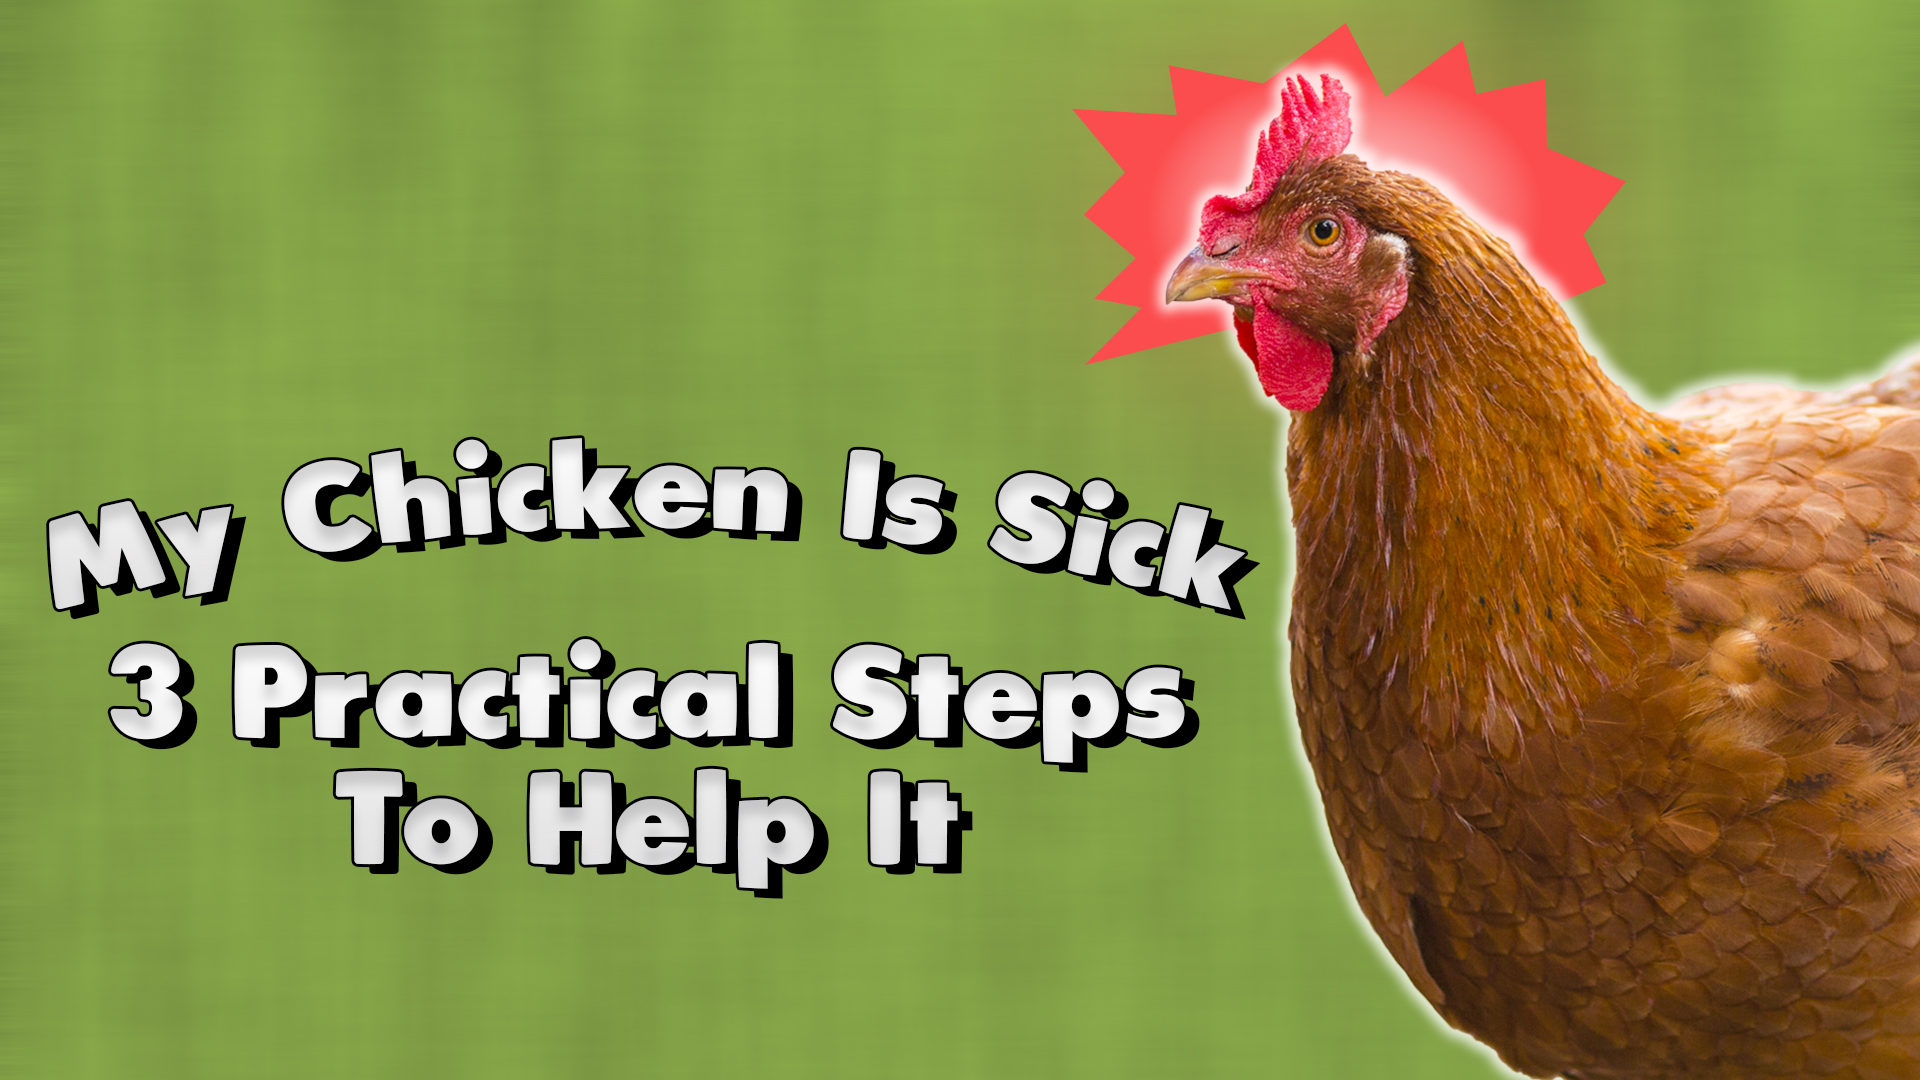 My Chicken Is Sick: 3 Practical Steps To Help It